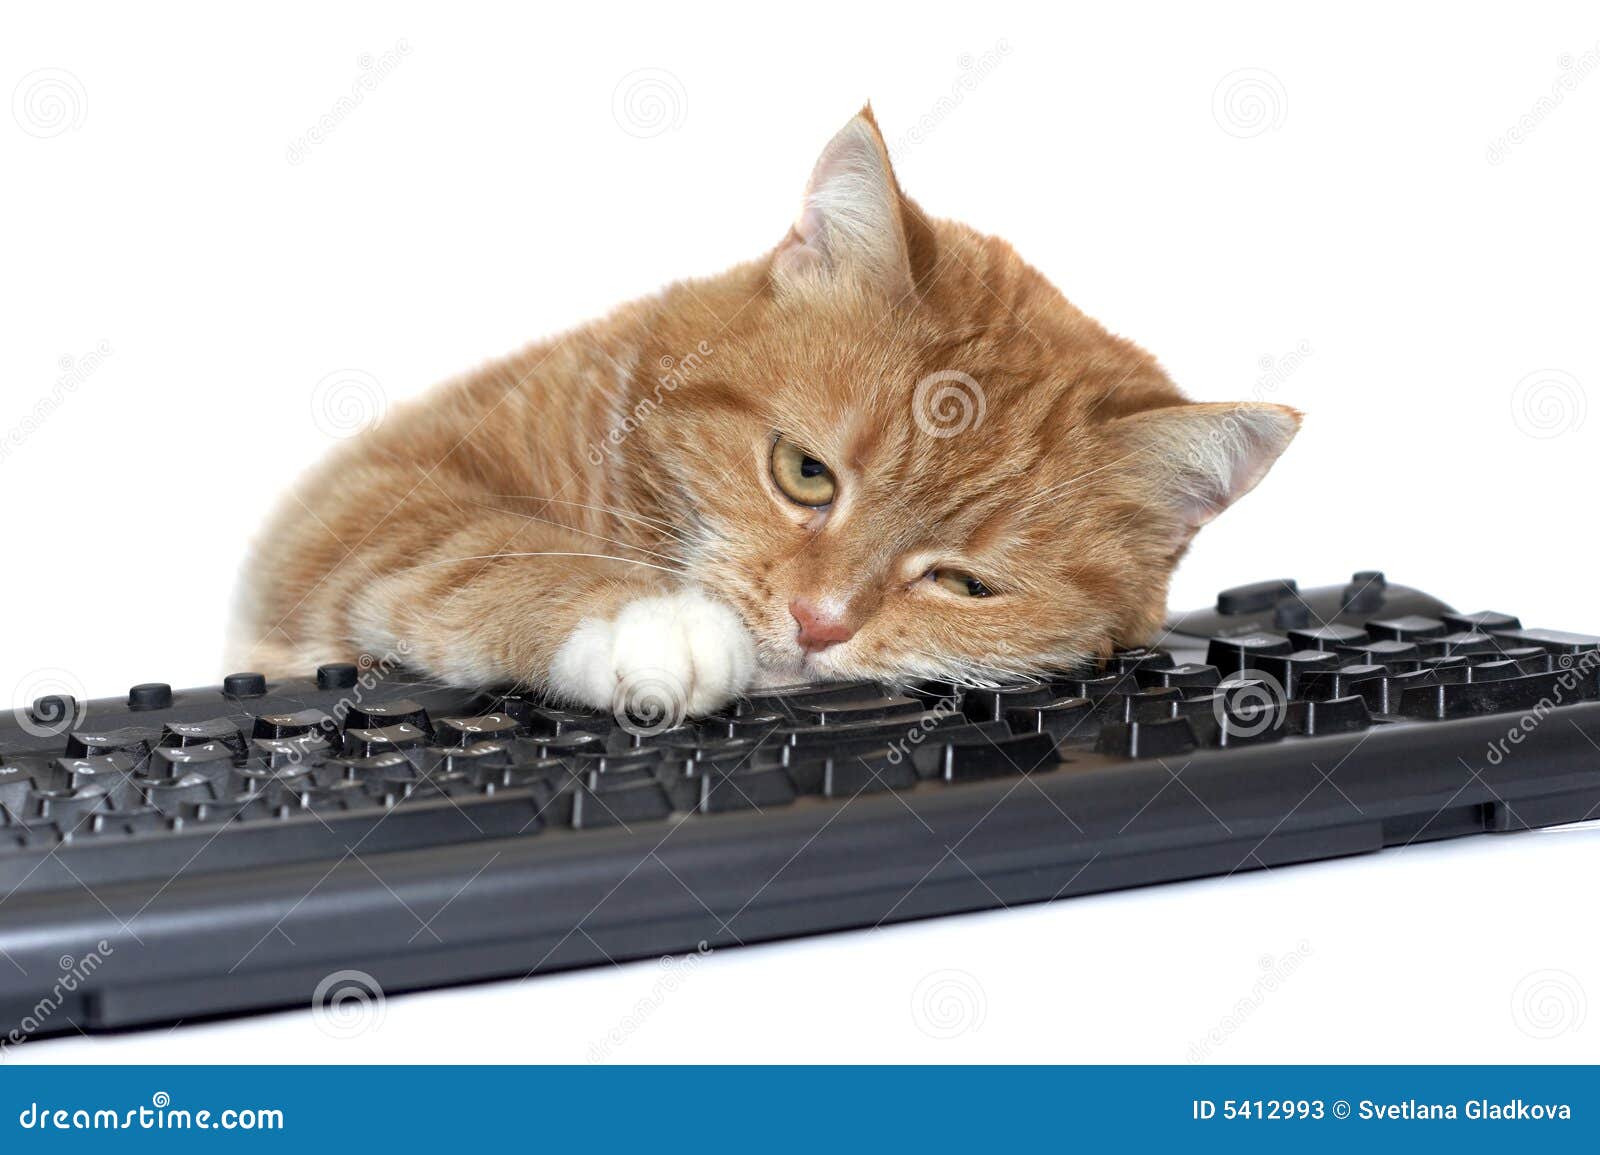 red cat lays on the keyboard